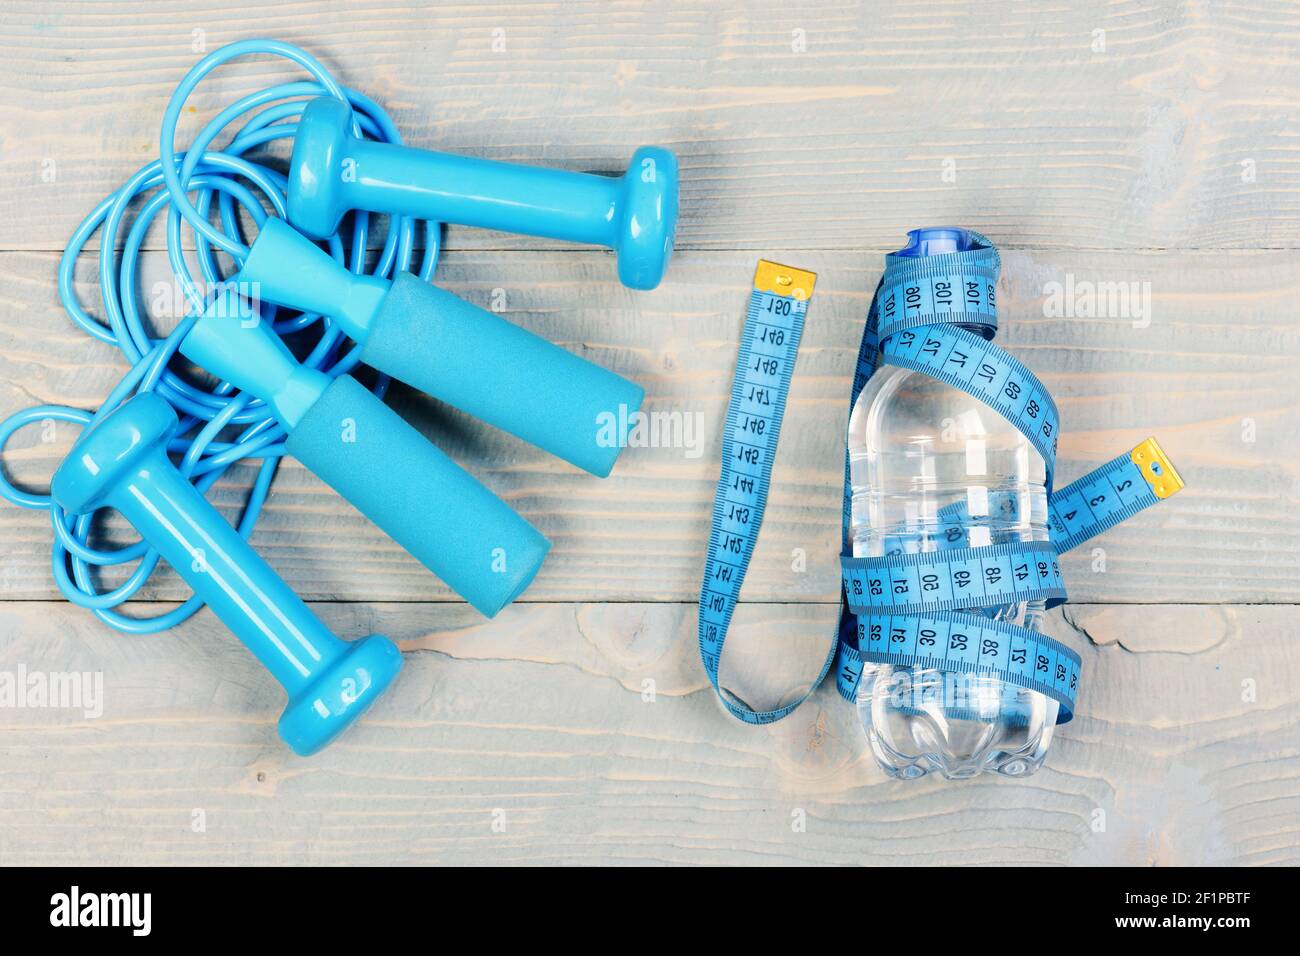 https://c8.alamy.com/comp/2F1PBTF/centimeter-in-cyan-blue-tied-around-bottle-on-wooden-vintage-background-tools-for-healthy-and-active-lifestyle-dumbbells-measuring-tape-and-jump-rope-top-view-workout-and-losing-weight-concept-2F1PBTF.jpg